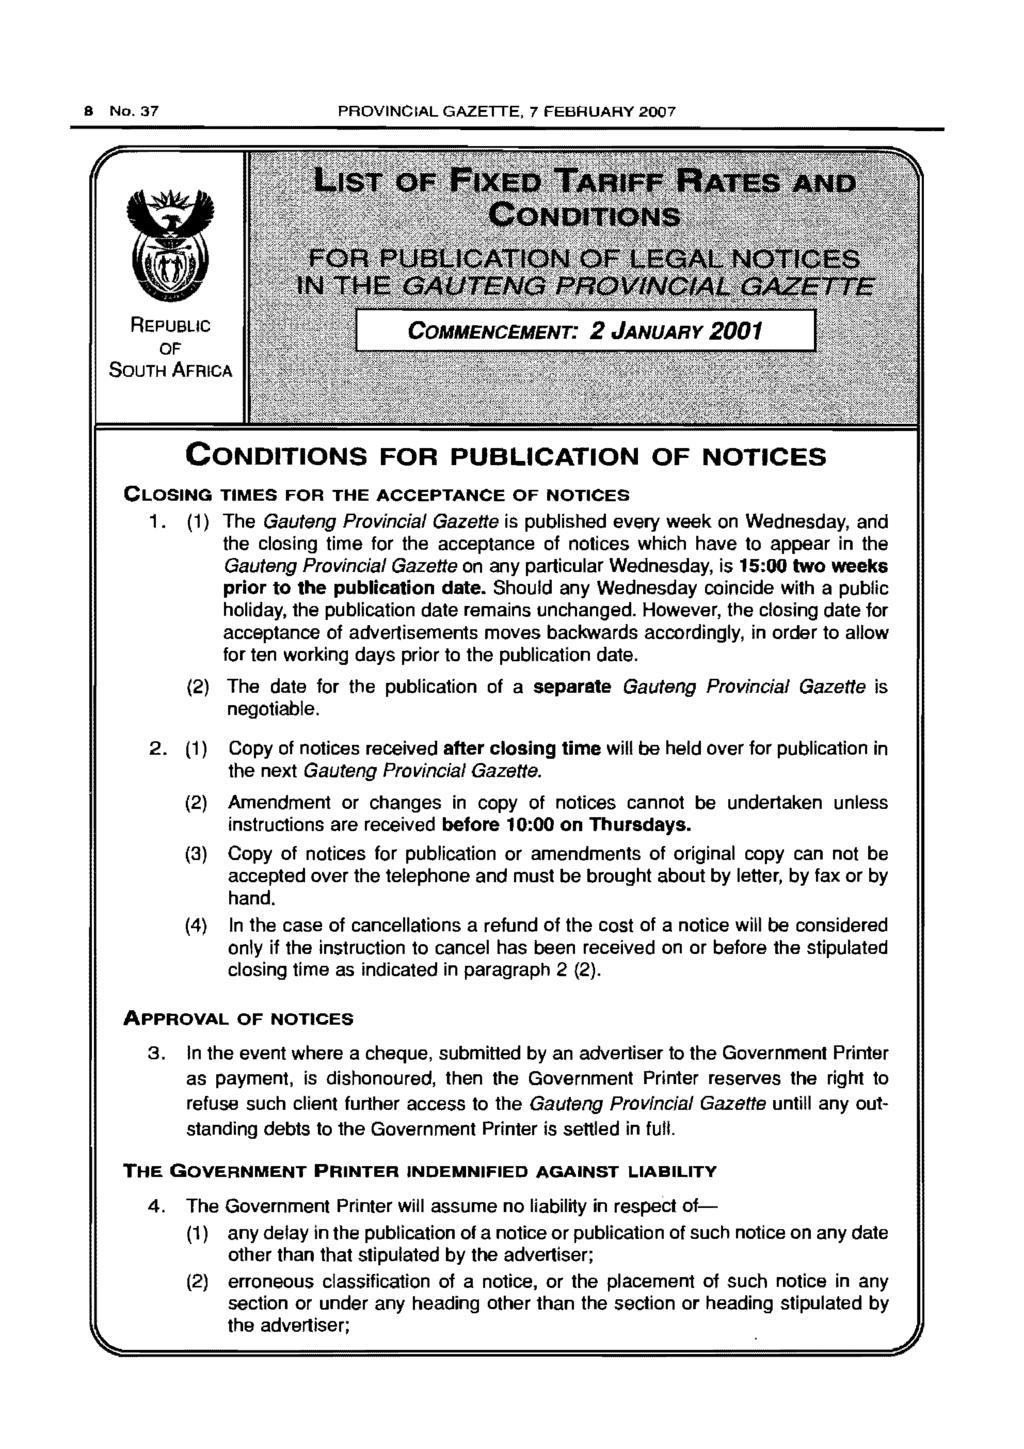 8 No. 37 PROVINCIAL GAZETTE, 7 FEBRUARY 2007 REPUBLIC OF SOUTH AFRICA CONDITIONS FOR PUBLICATION OF NOTICES CLOSING TIMES FOR THE ACCEPTANCE OF NOTICES 1.